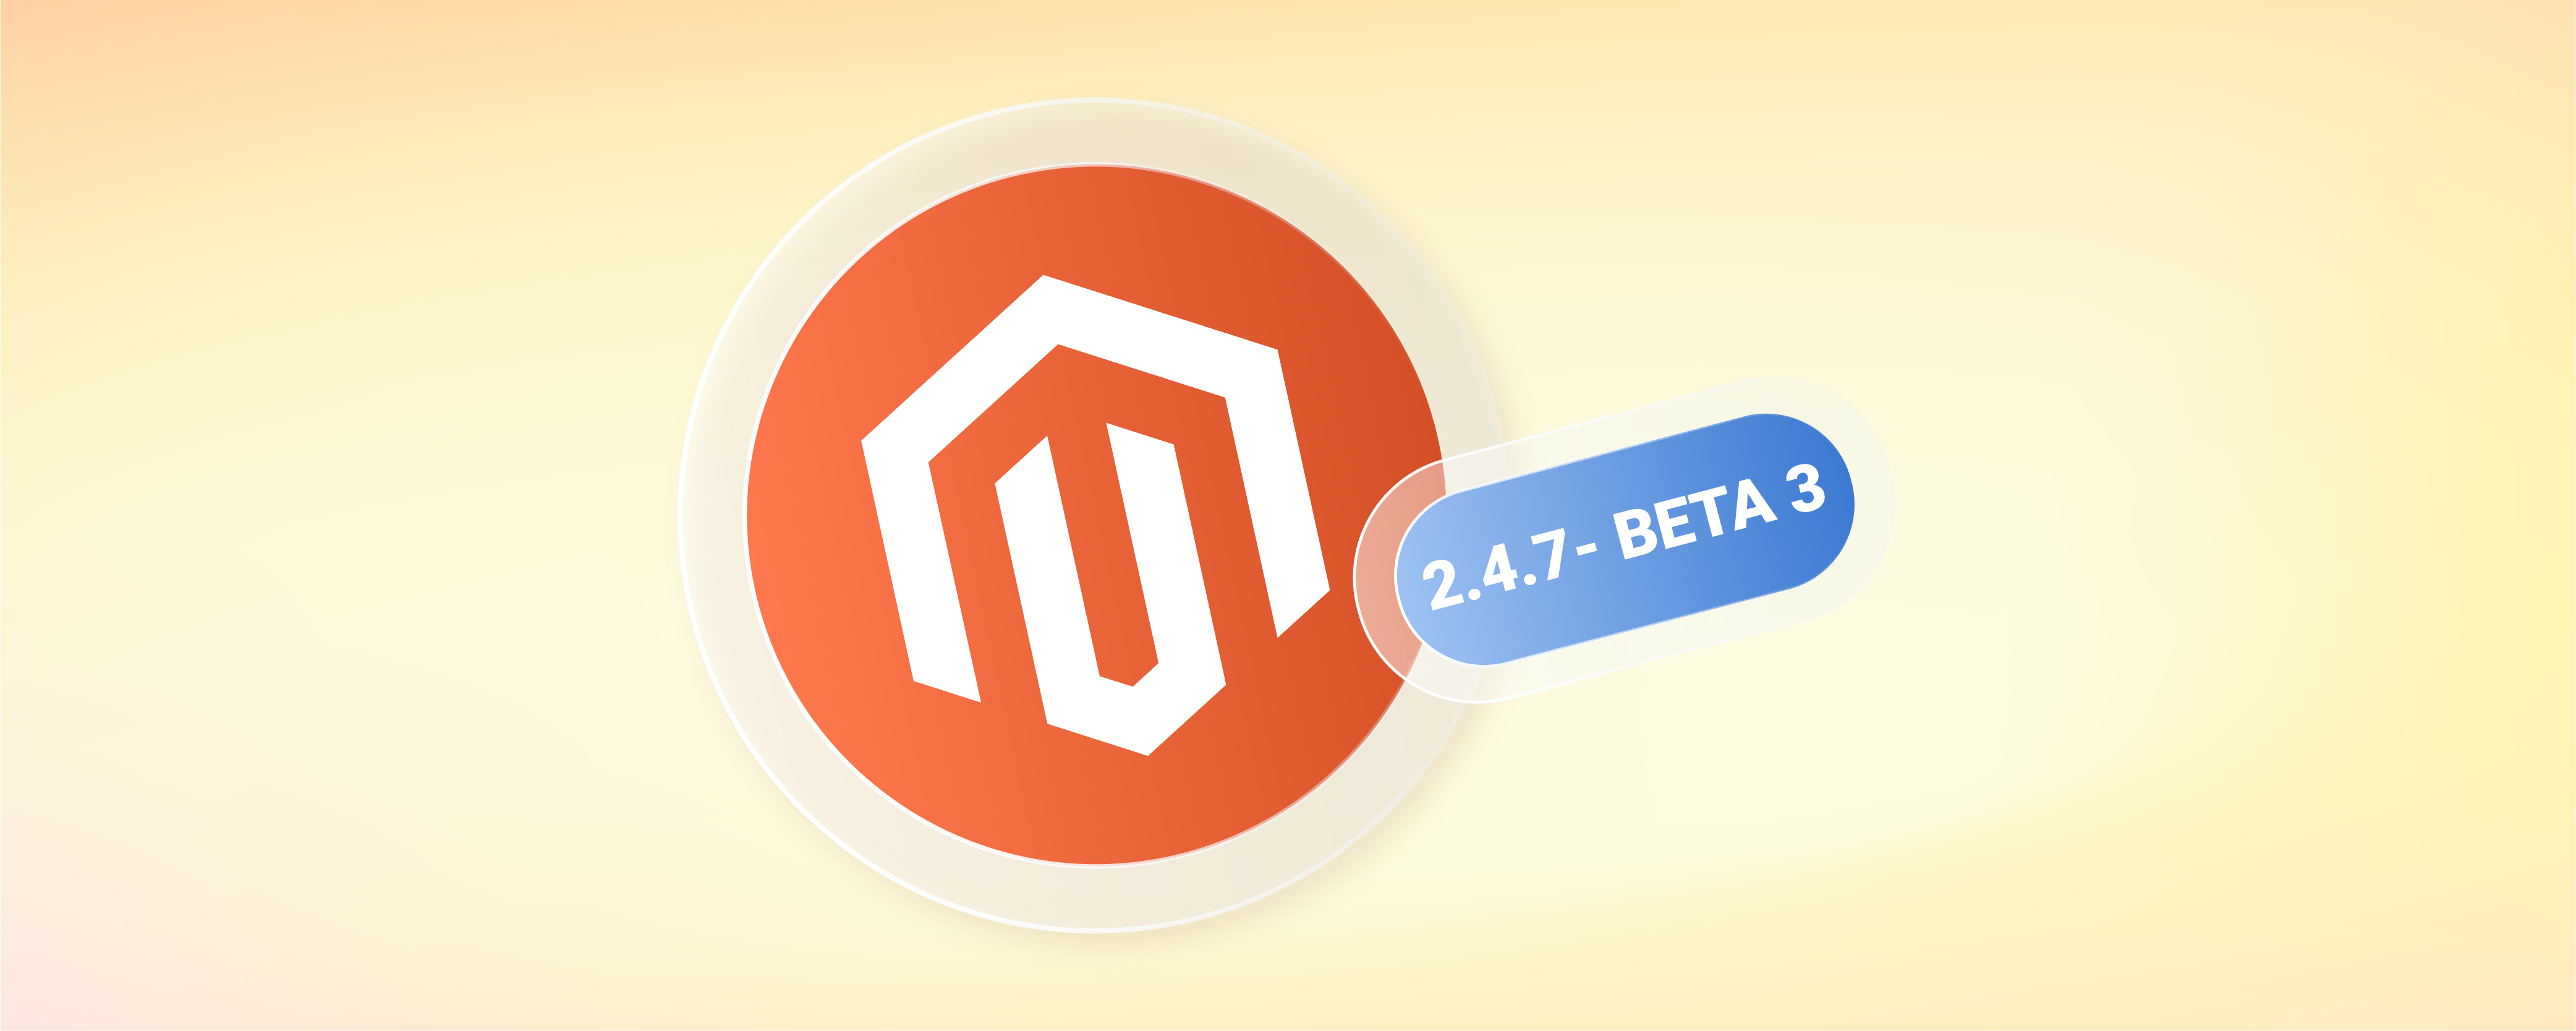 Magento 2.4.7-beta3: Release Notes, Features, and Improvements